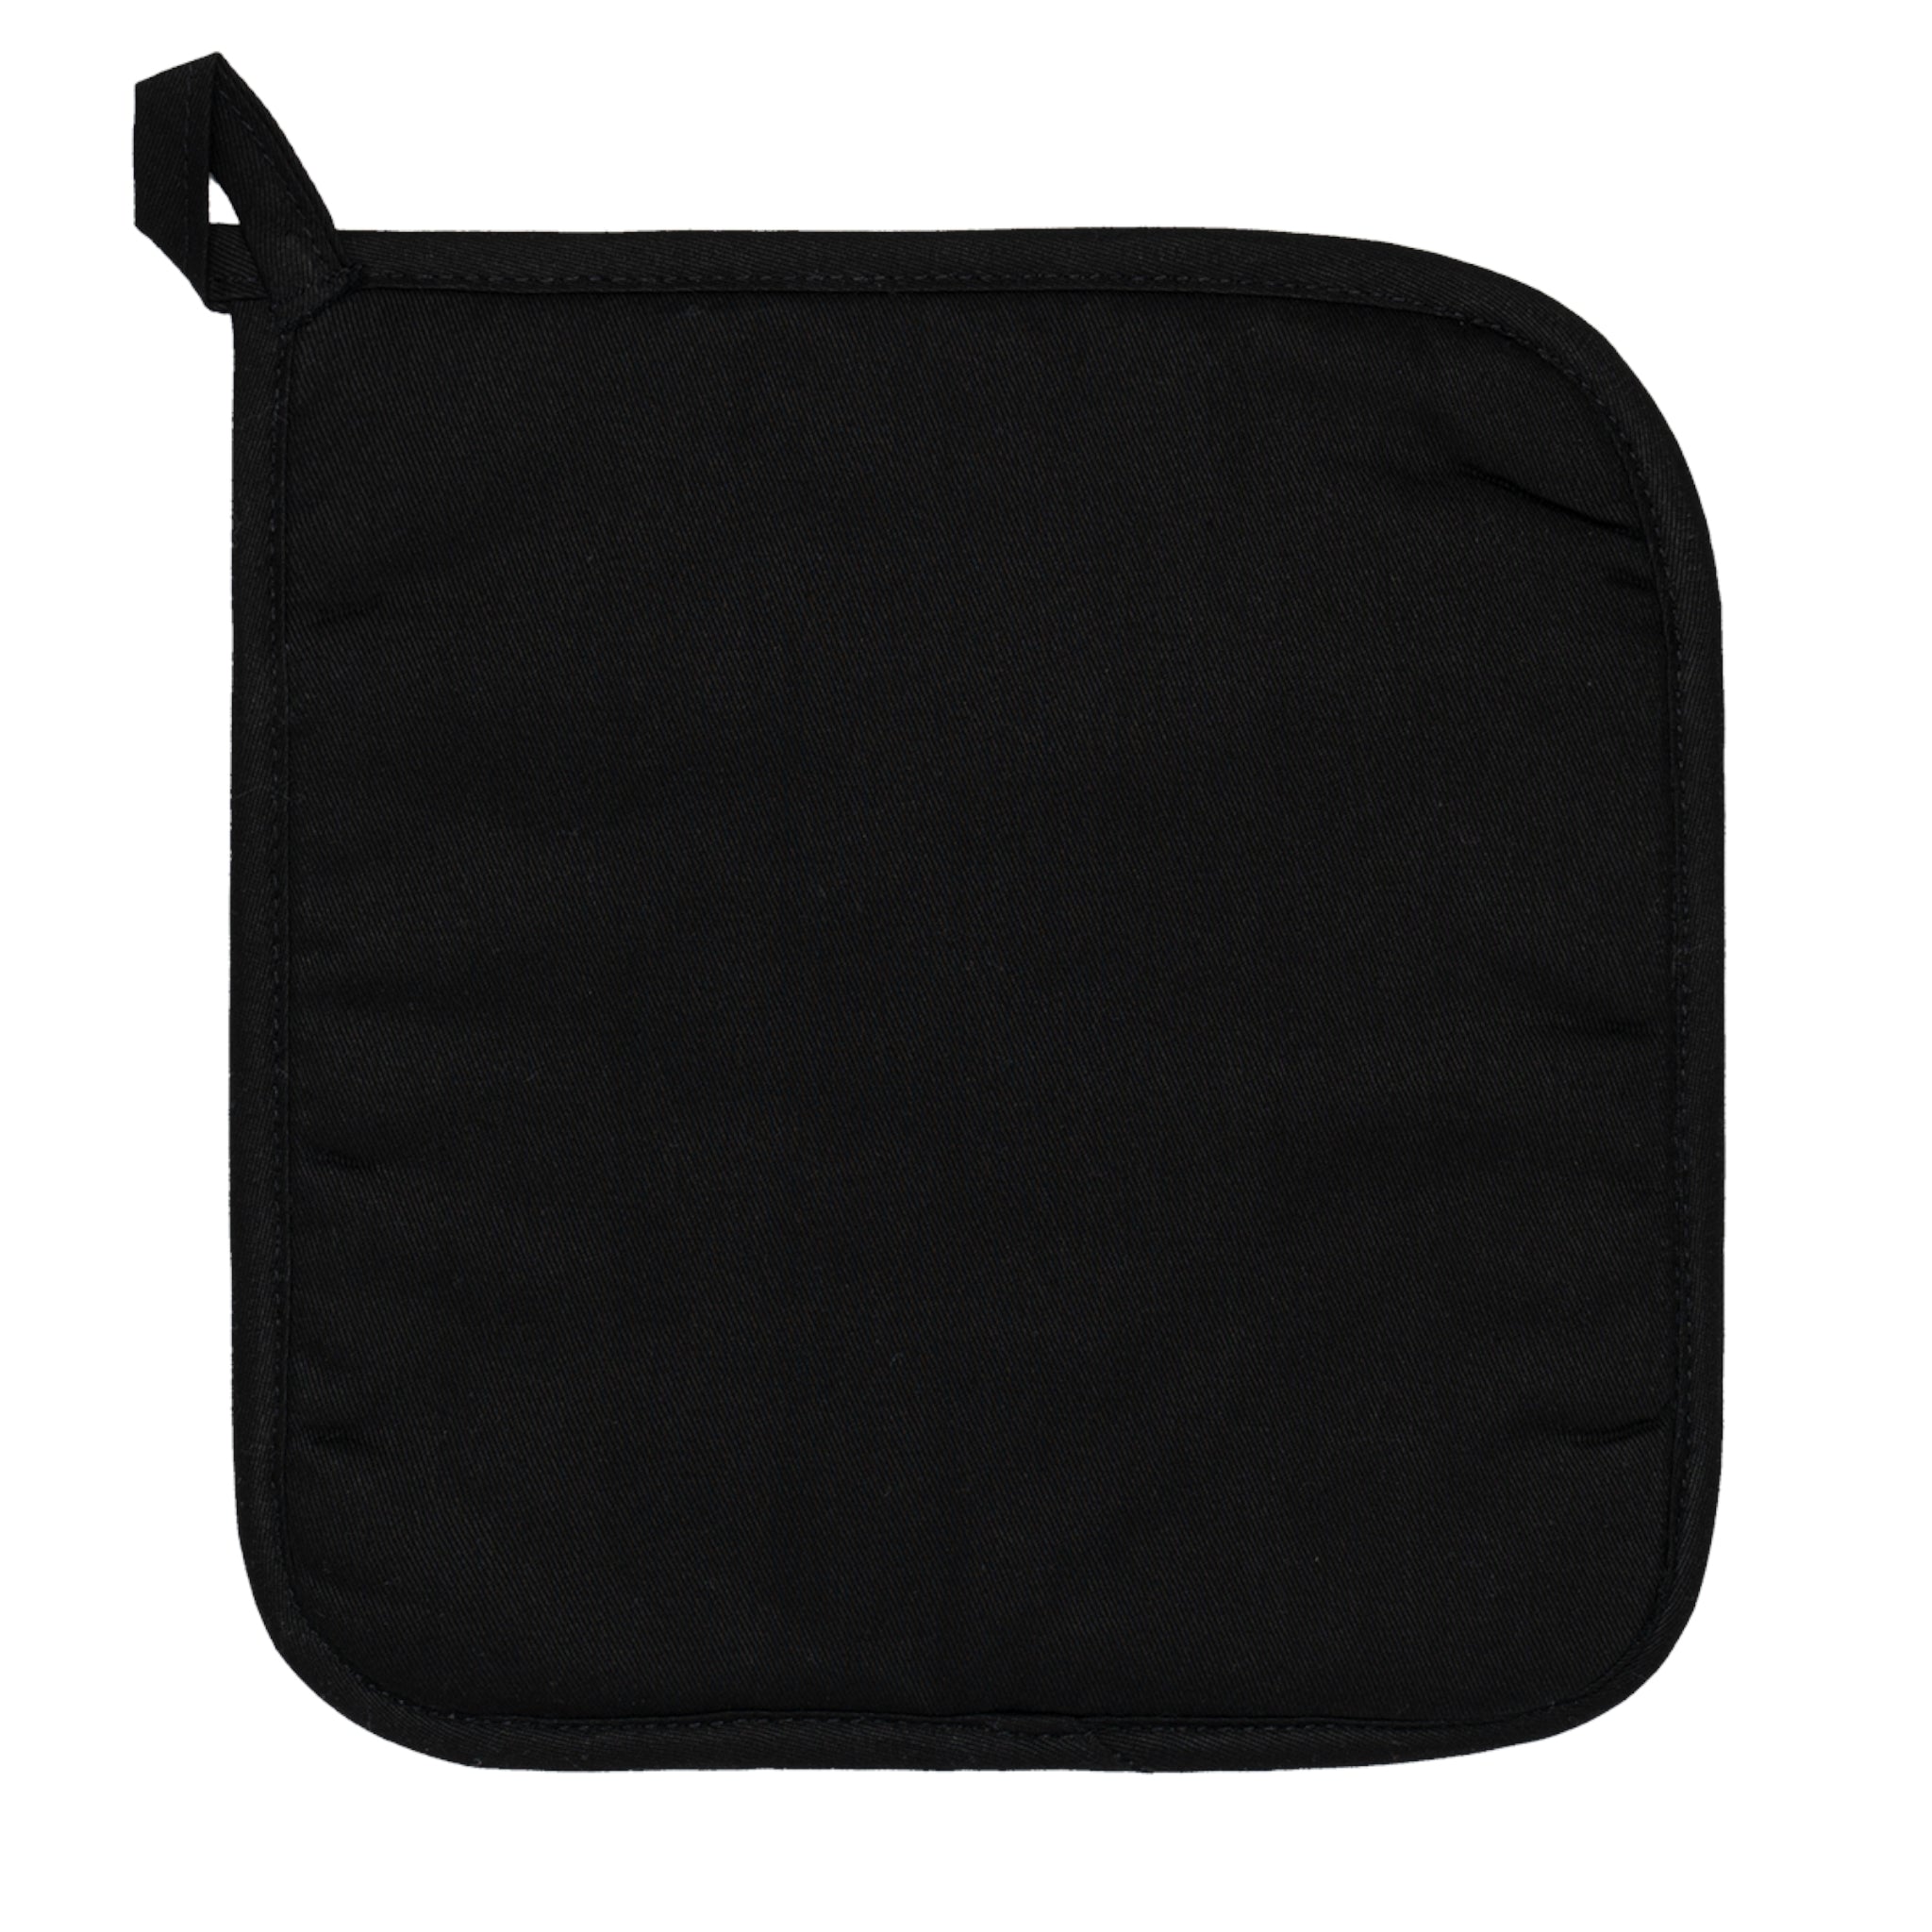 the-most-stylish-and-affordable-meditation-aid-pot-holder-with-pocket-online-hot-sale_2.jpg